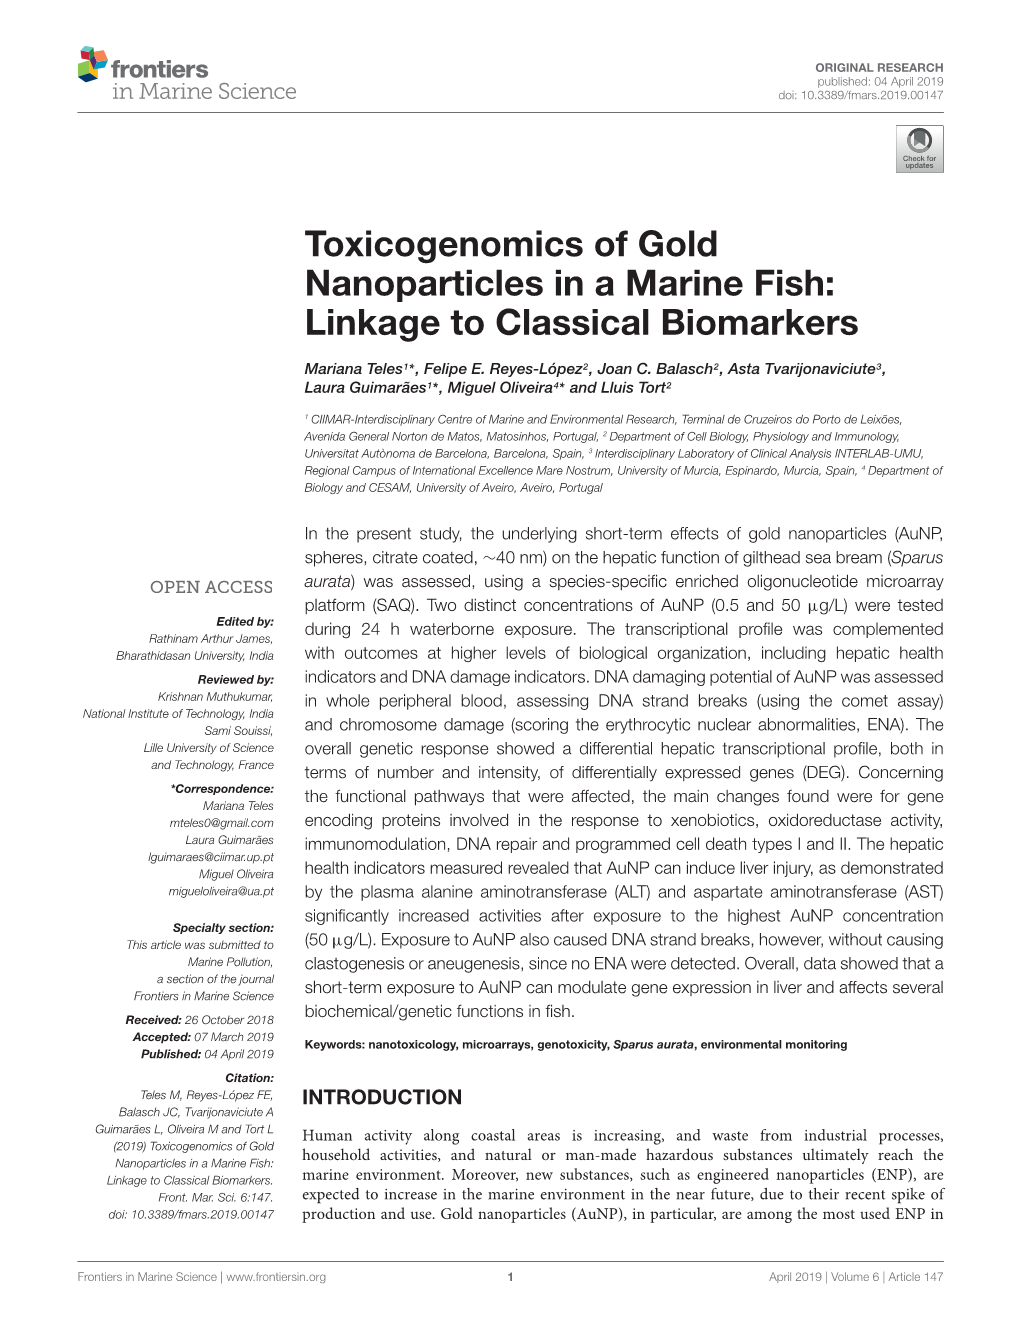 Toxicogenomics of Gold Nanoparticles in a Marine Fish: Linkage to Classical Biomarkers